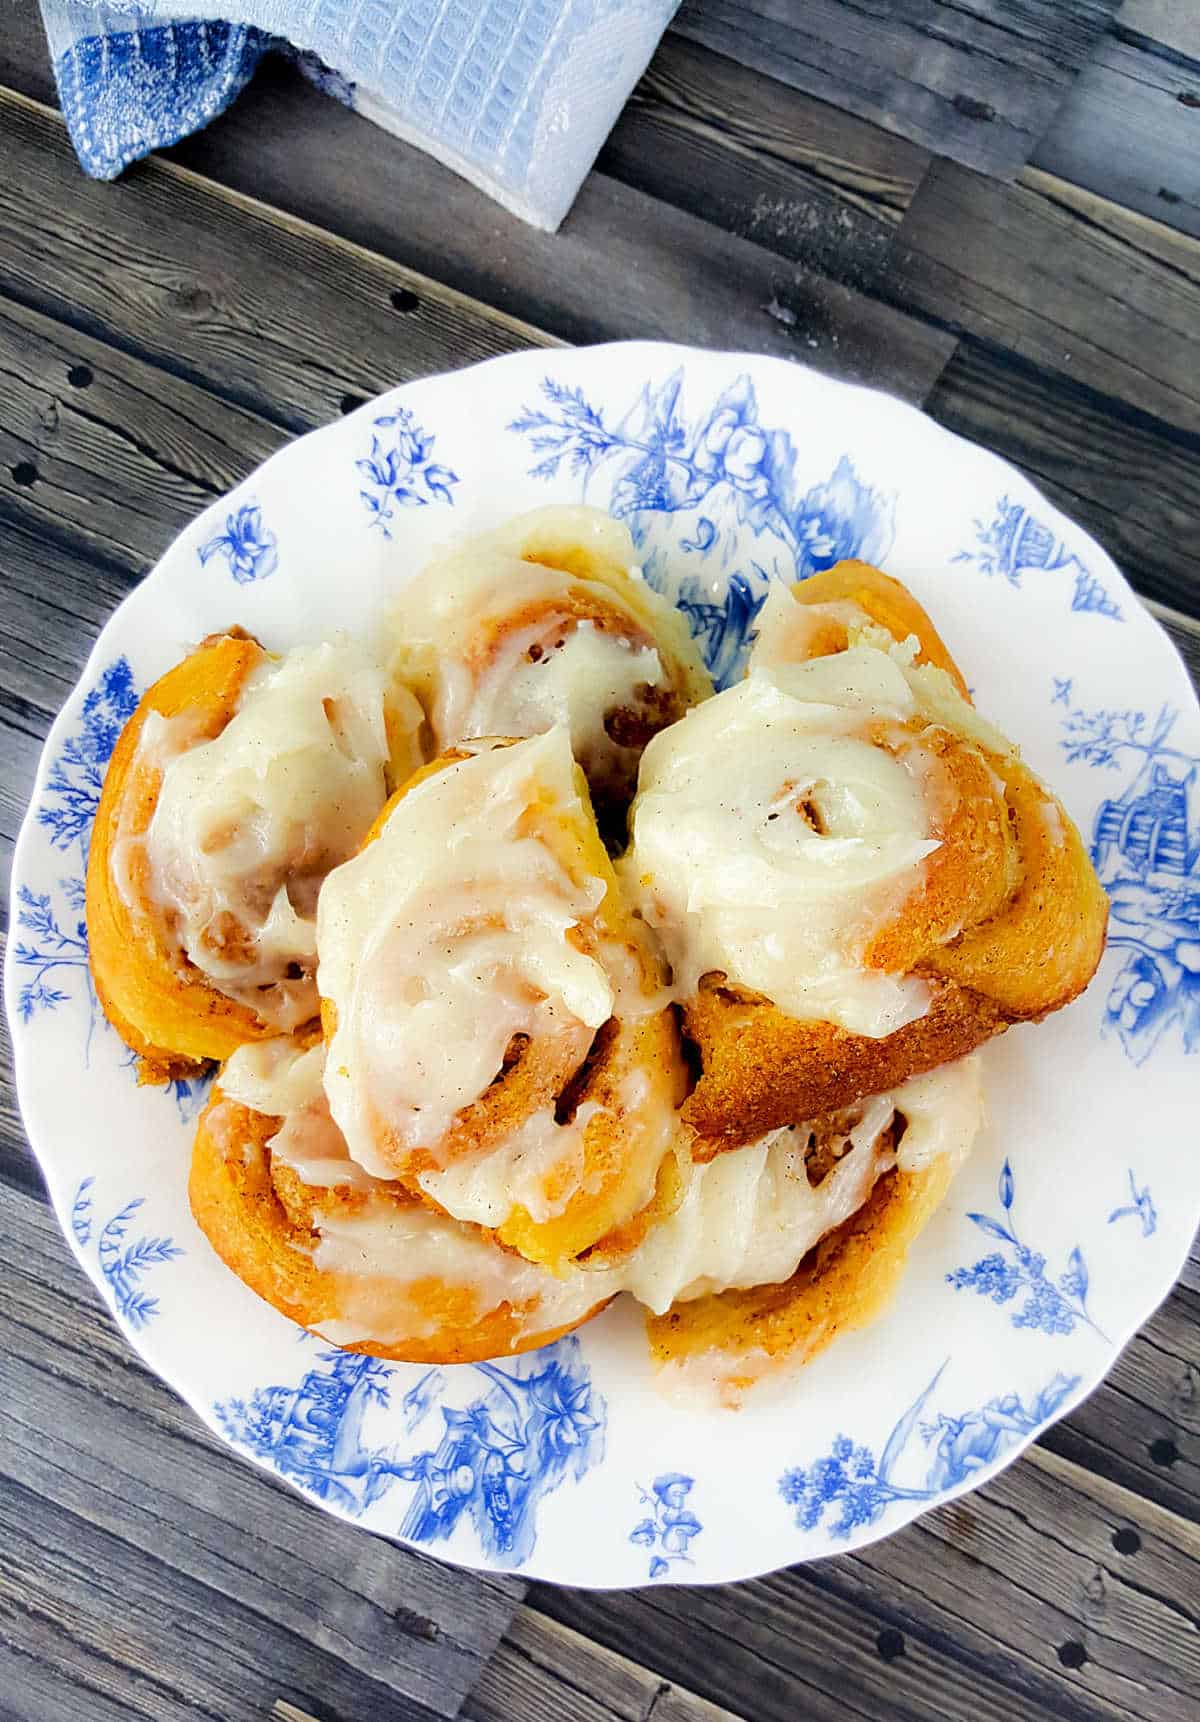 iced cinnamon rolls on a blue and white plate